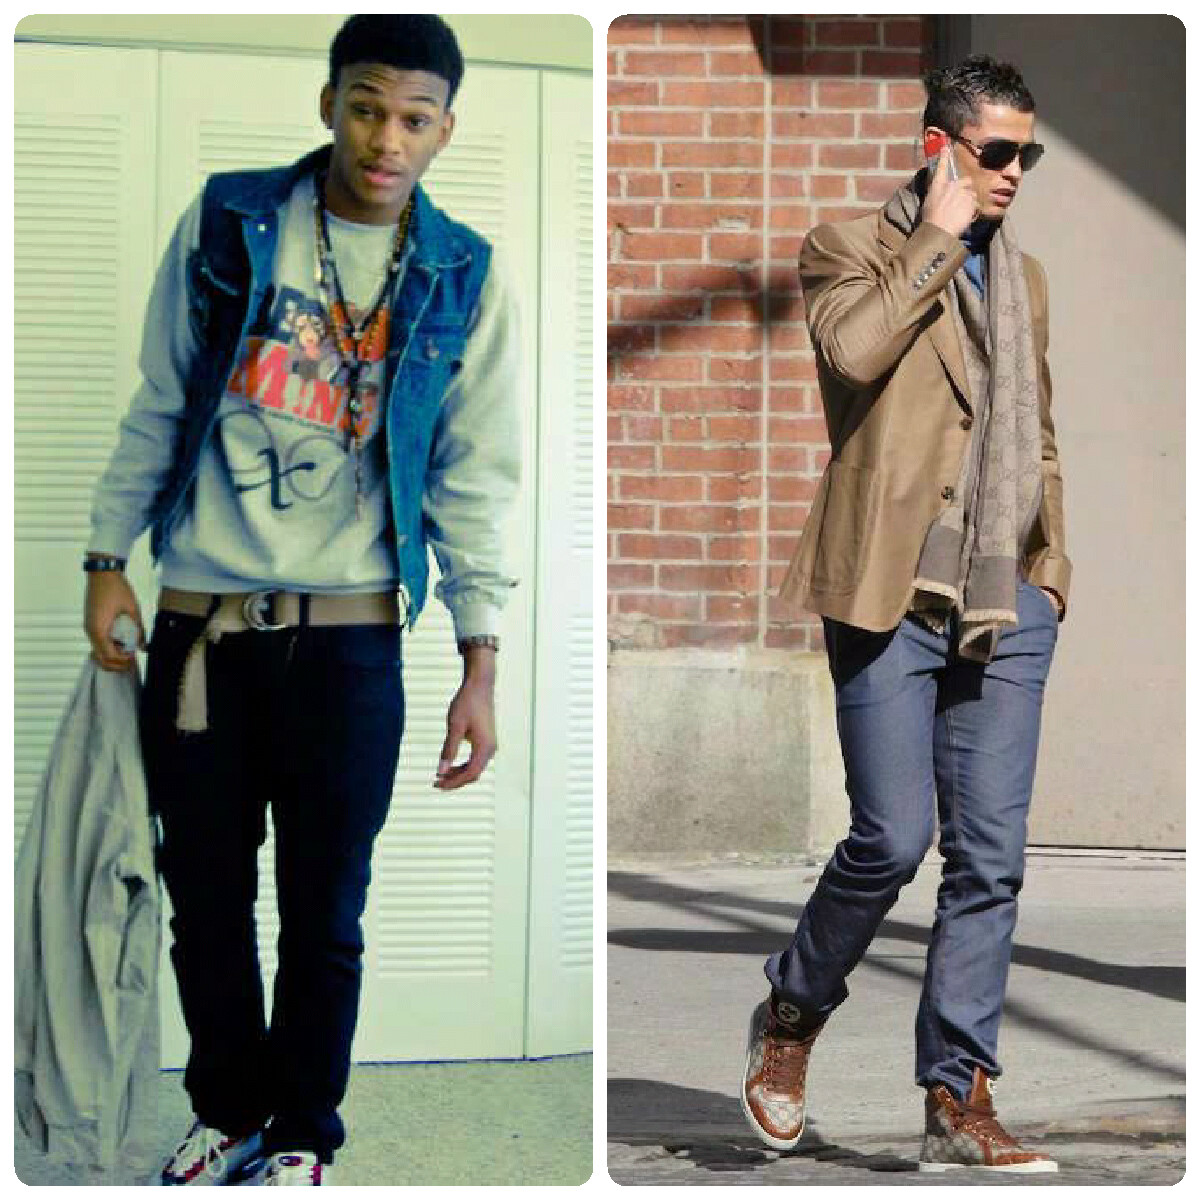 STYLE: Casual Outfits for Guys